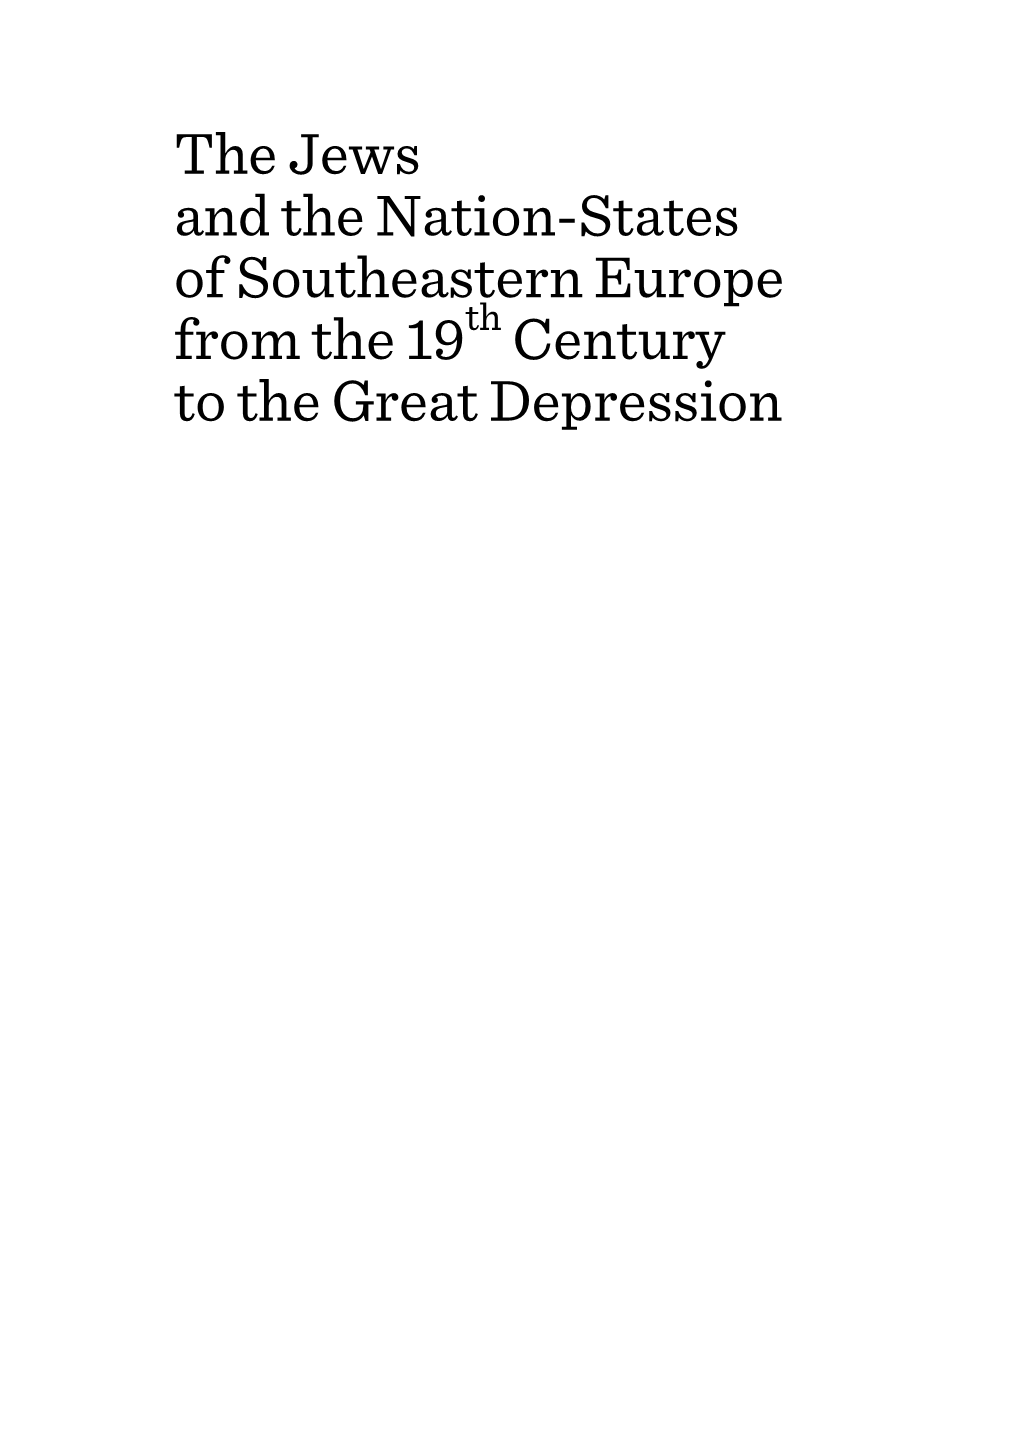 The Jews and the Nation-States of Southeastern Europe from the 19 Century to the Great Depression